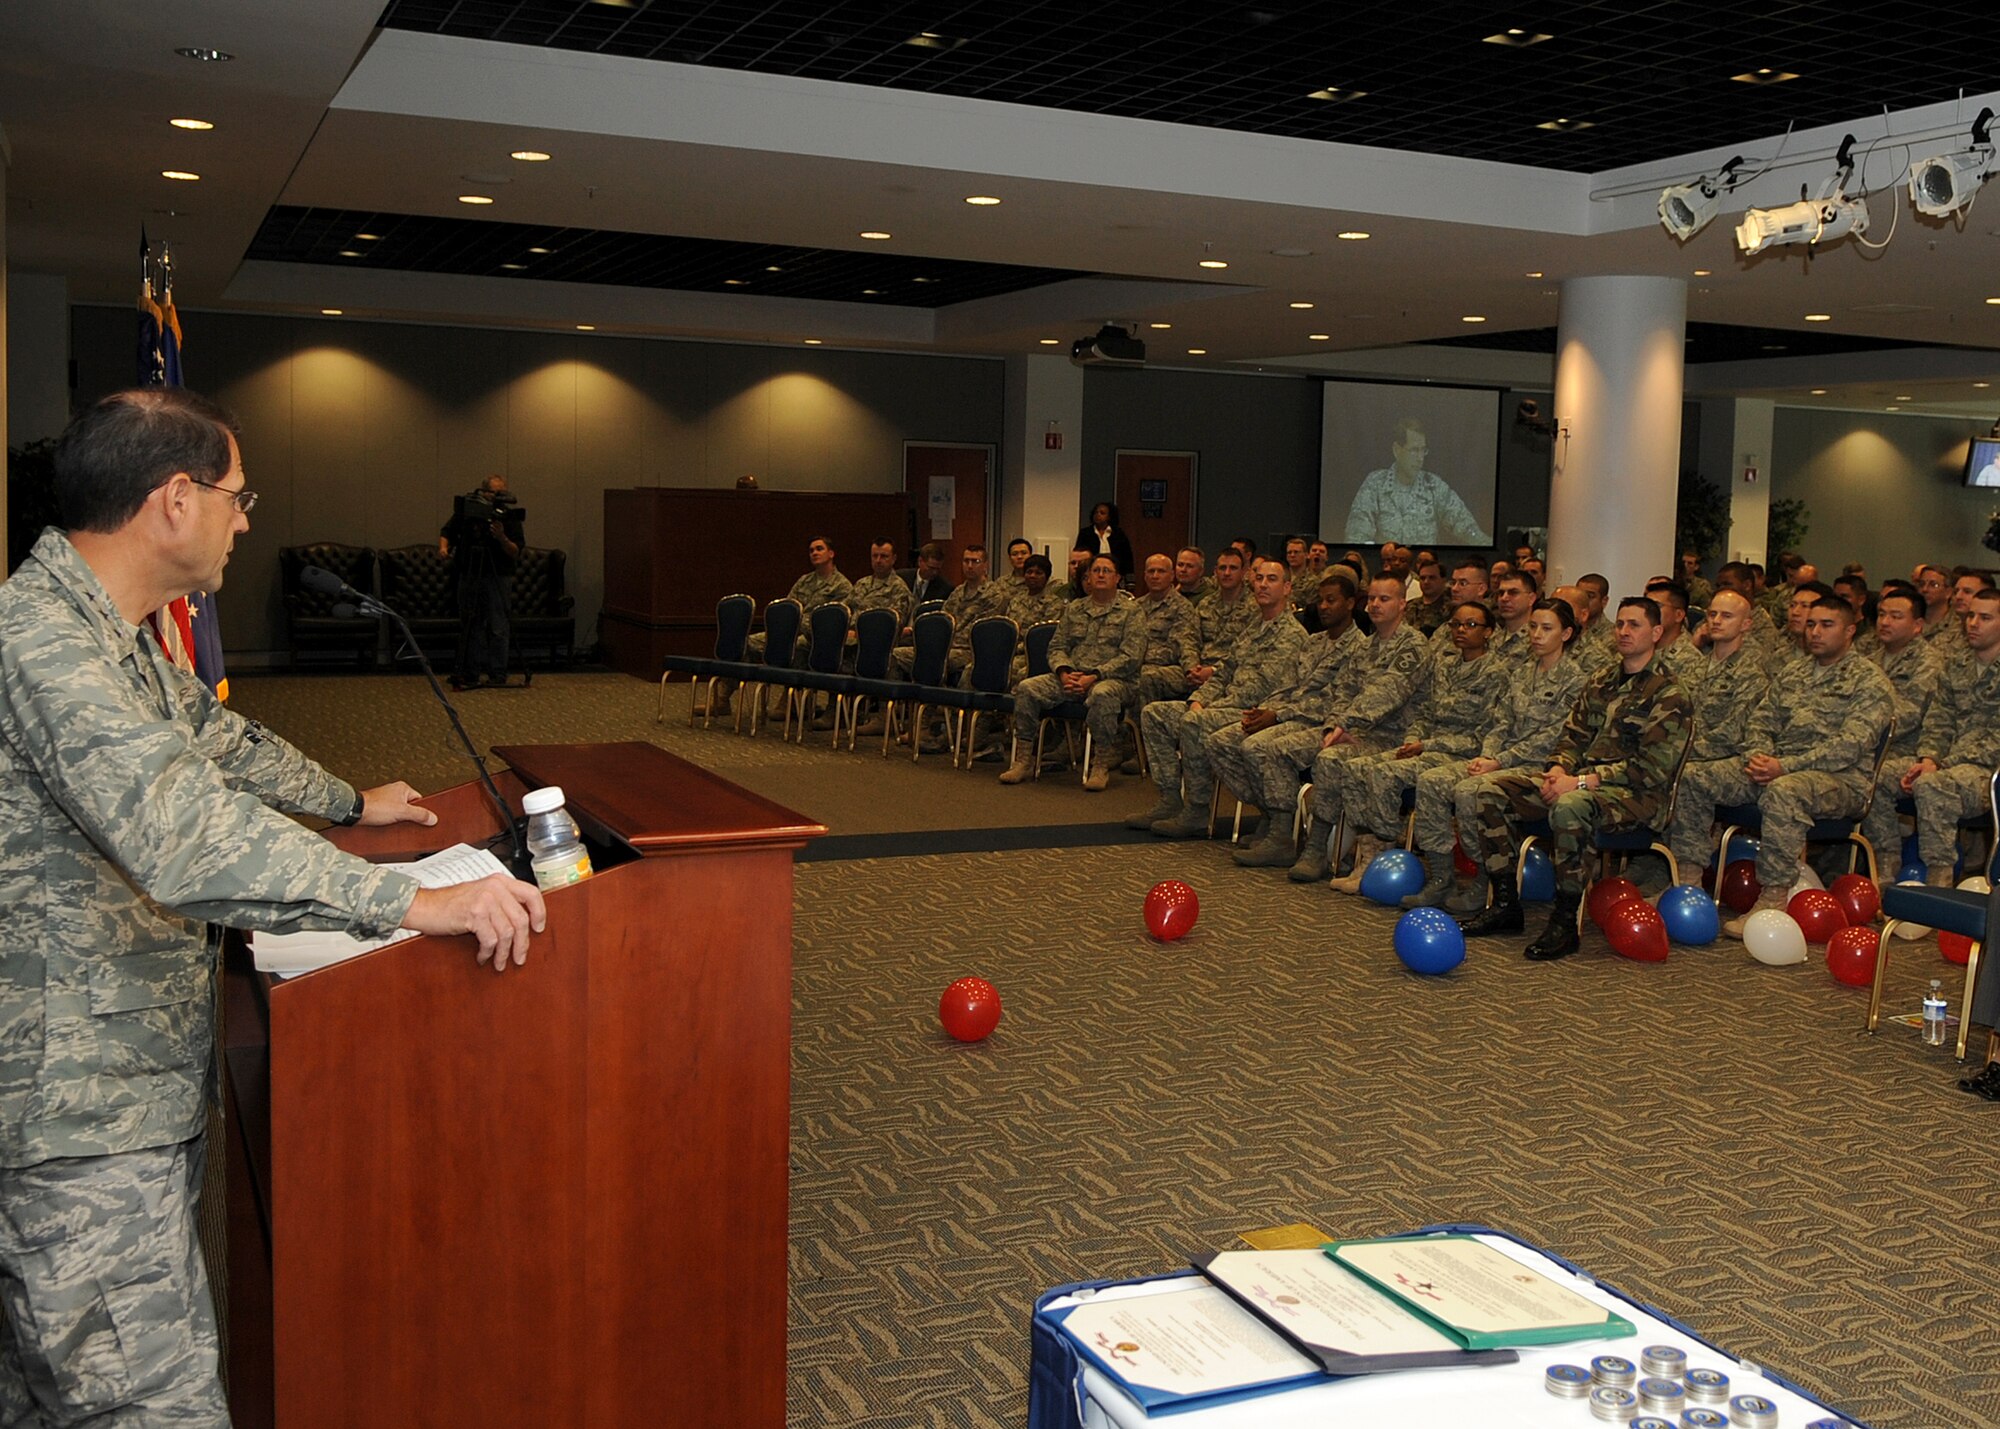 Lt. Gen. Tom Sheridan, Space and Missile Systems Center commander, thanks and welcomes home airmen who recently returned from deployment during the opening remarks of the "SMC Welcome Home Airmen Celebration" at the Gordon Conference Center, Jan. 29. (Photo by Stephen Schester)